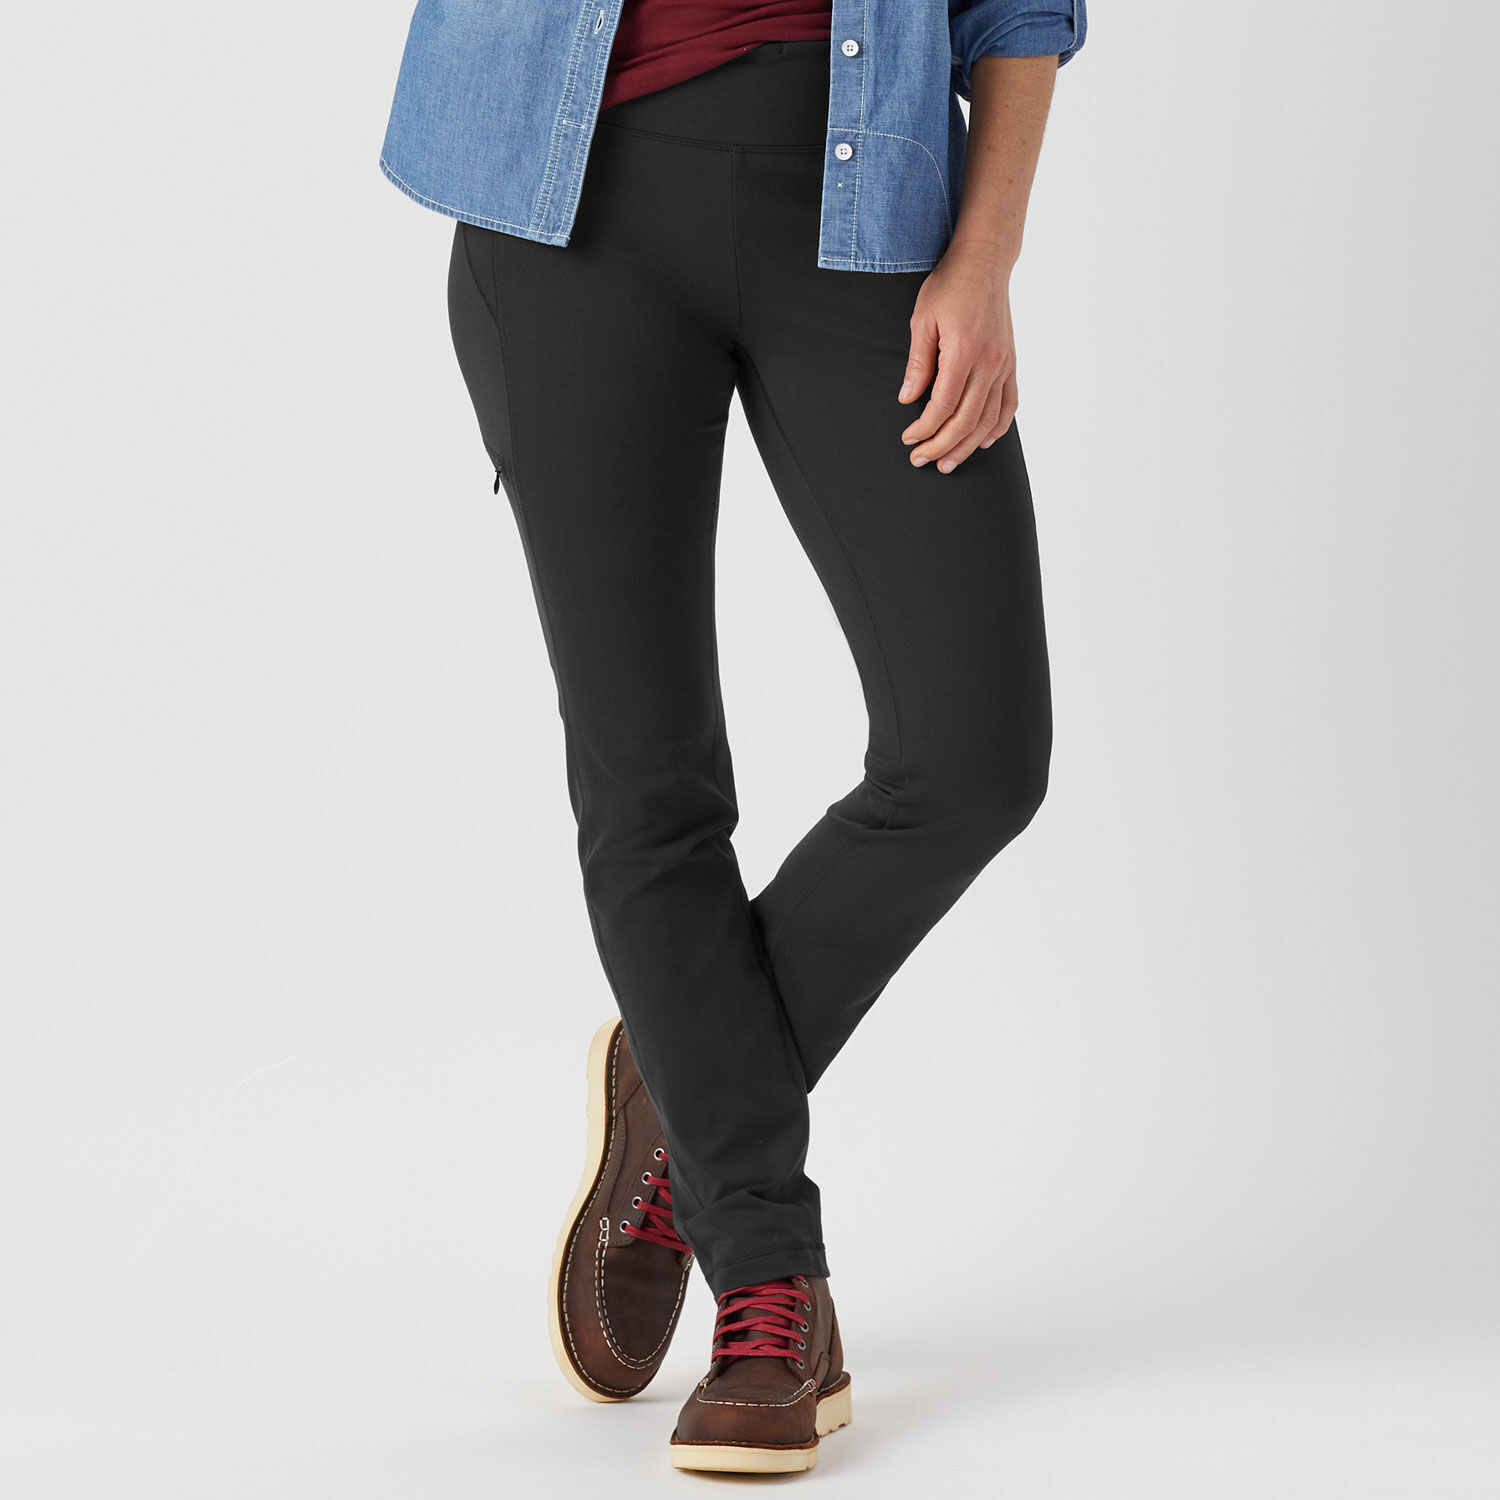 Women's Bottoms | Duluth Trading Company